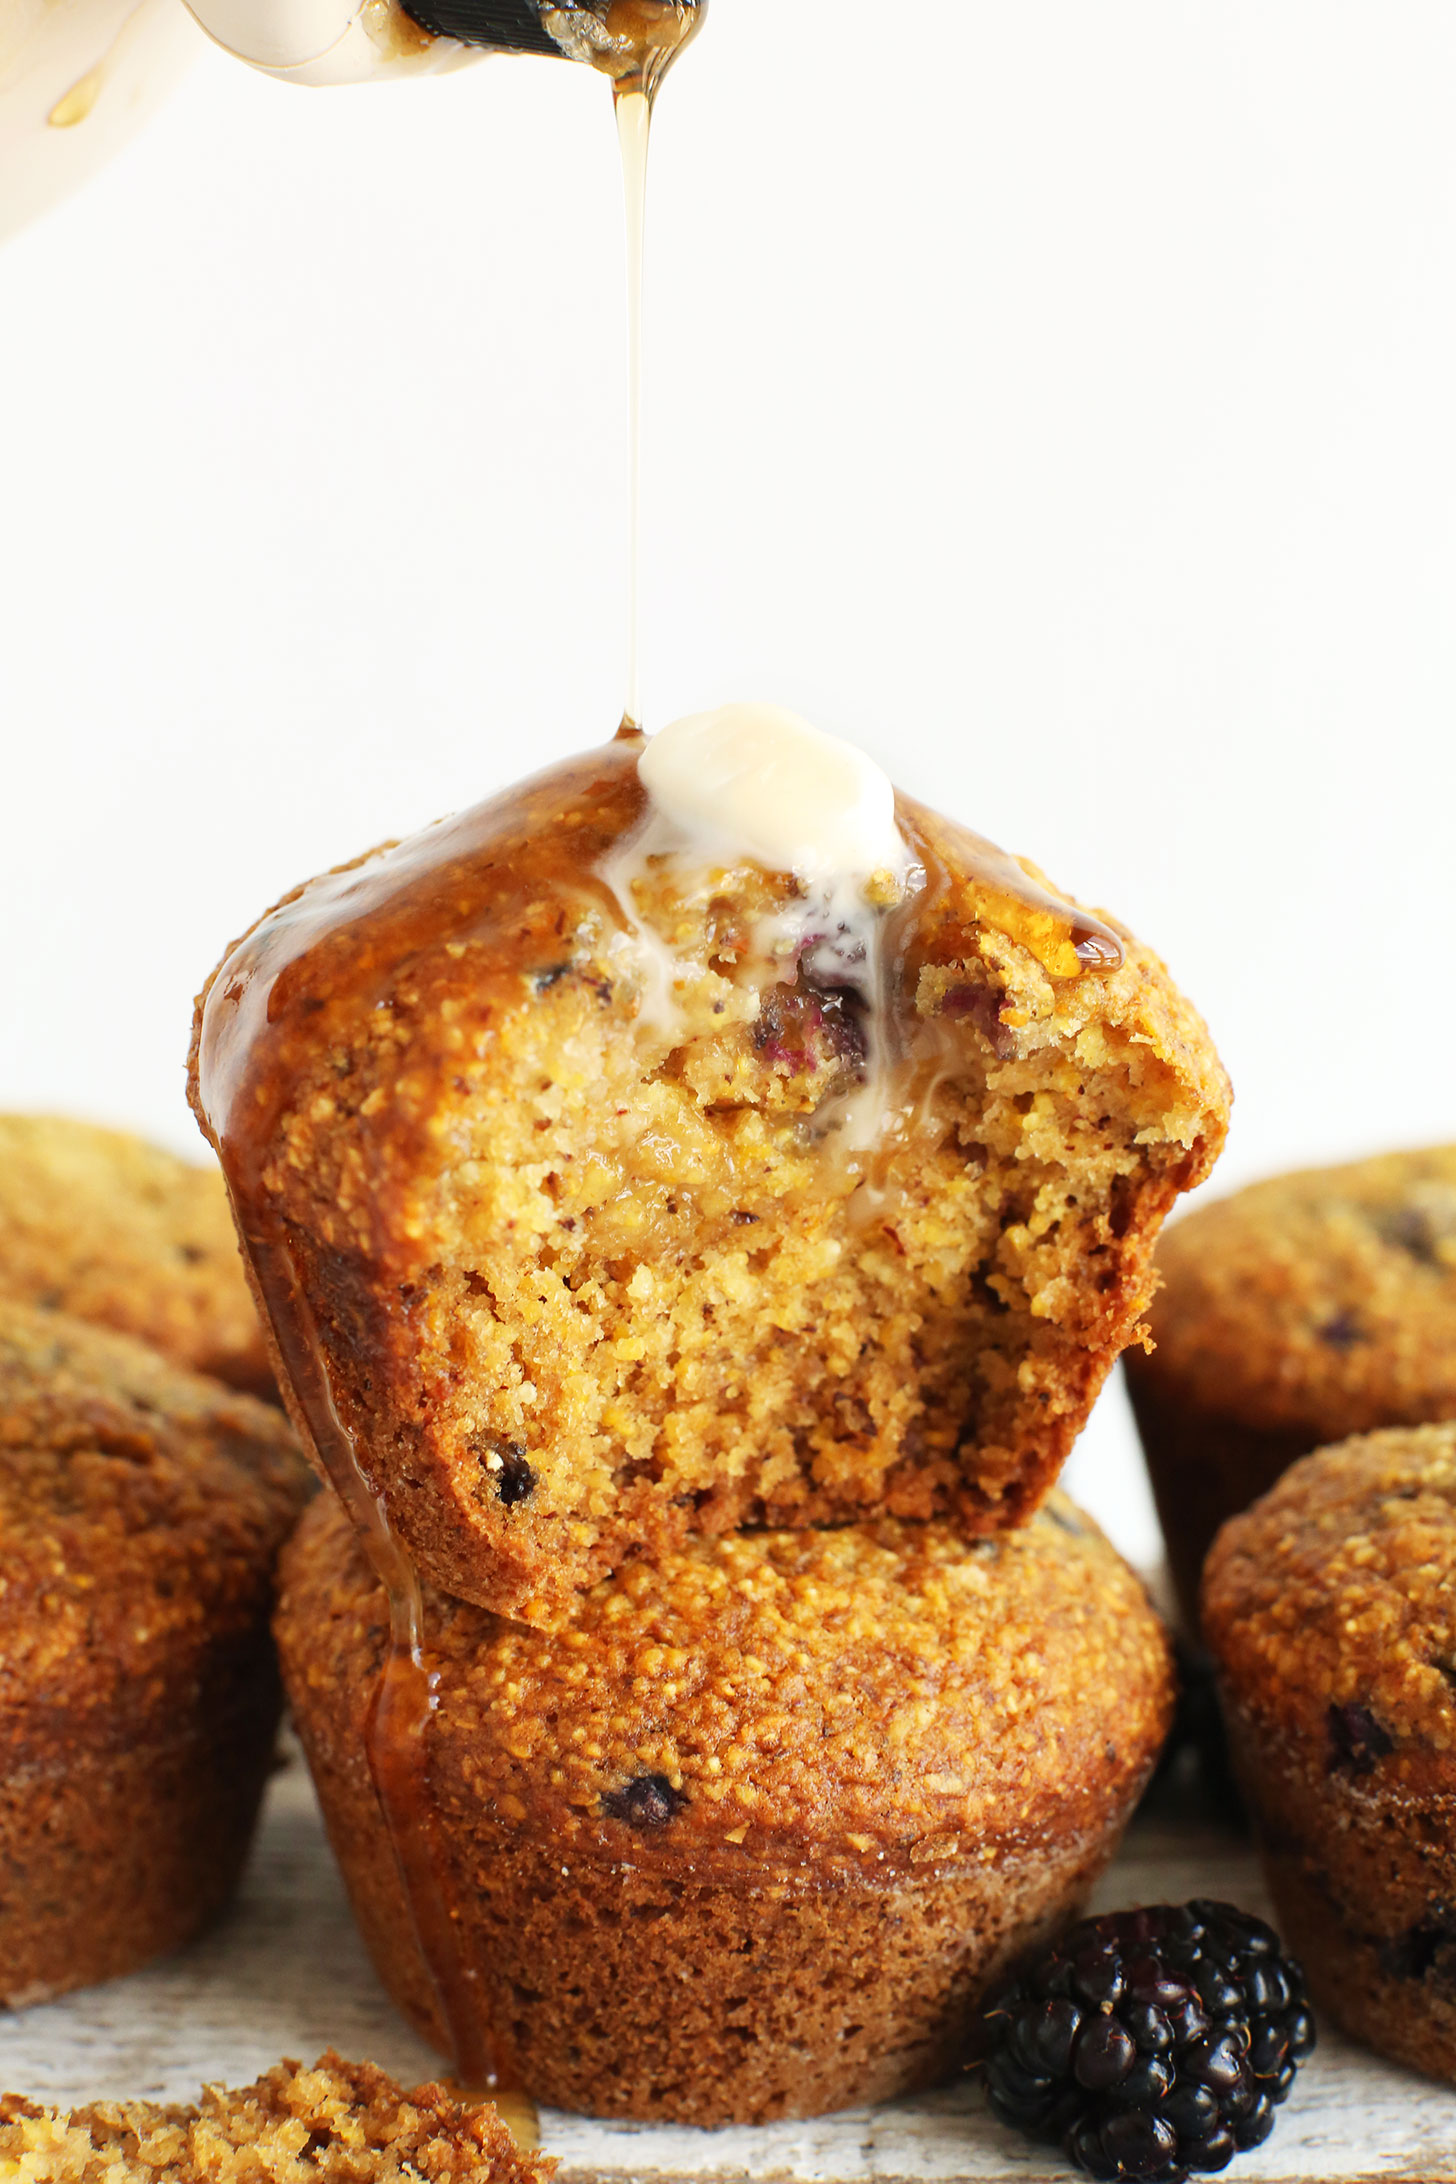 Pouring syrup onto an amazing Blackberry Cornmeal Muffin